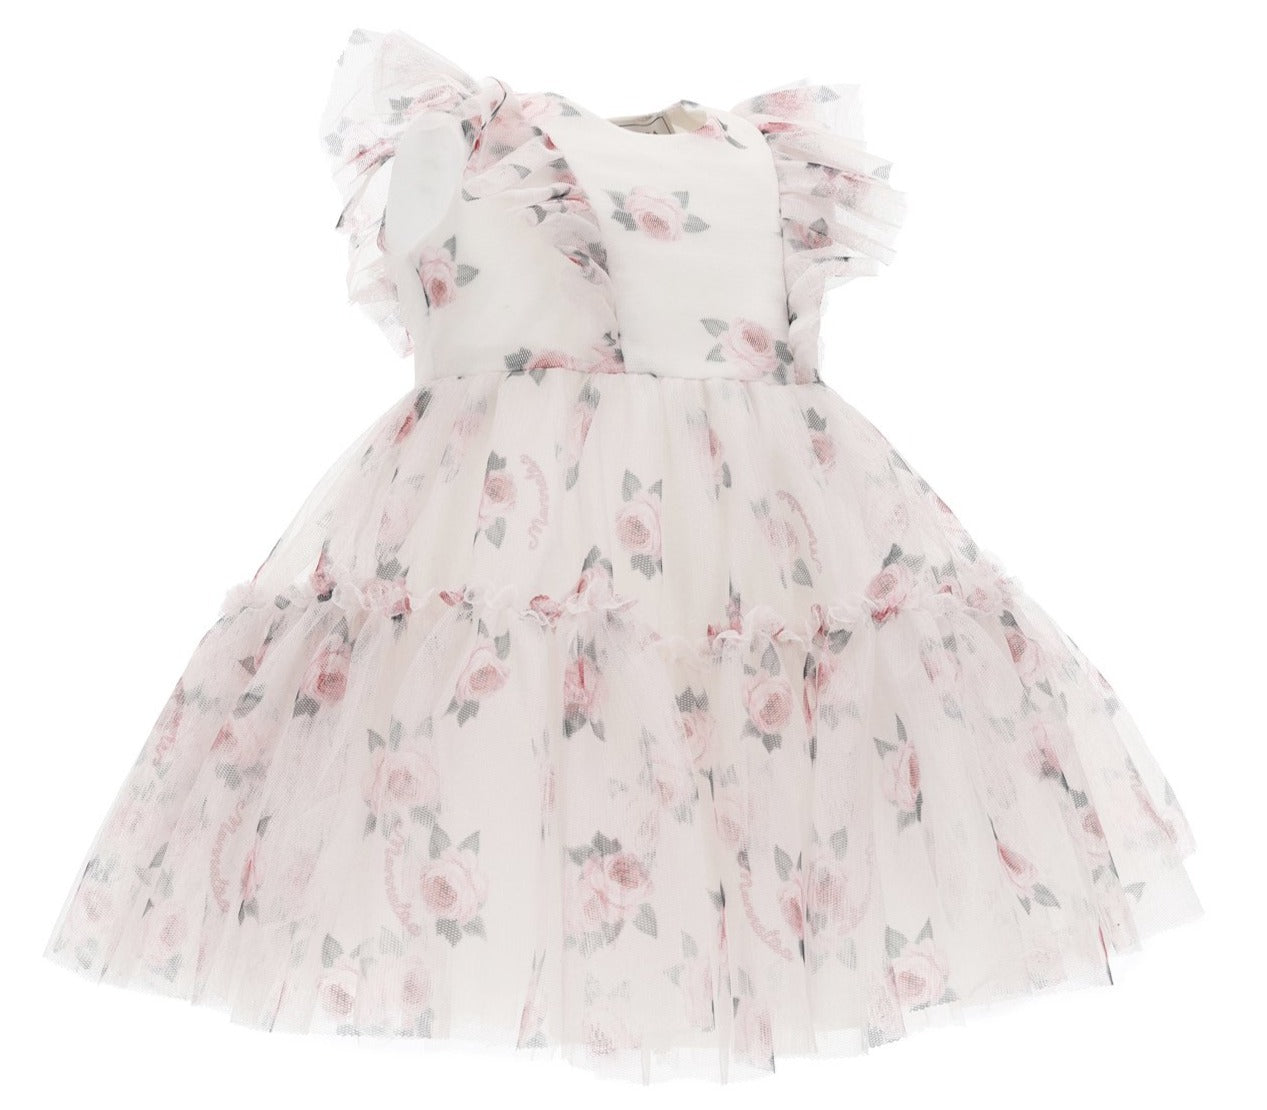 Monnalisa Baby Girl Floral Tulle Party Dress